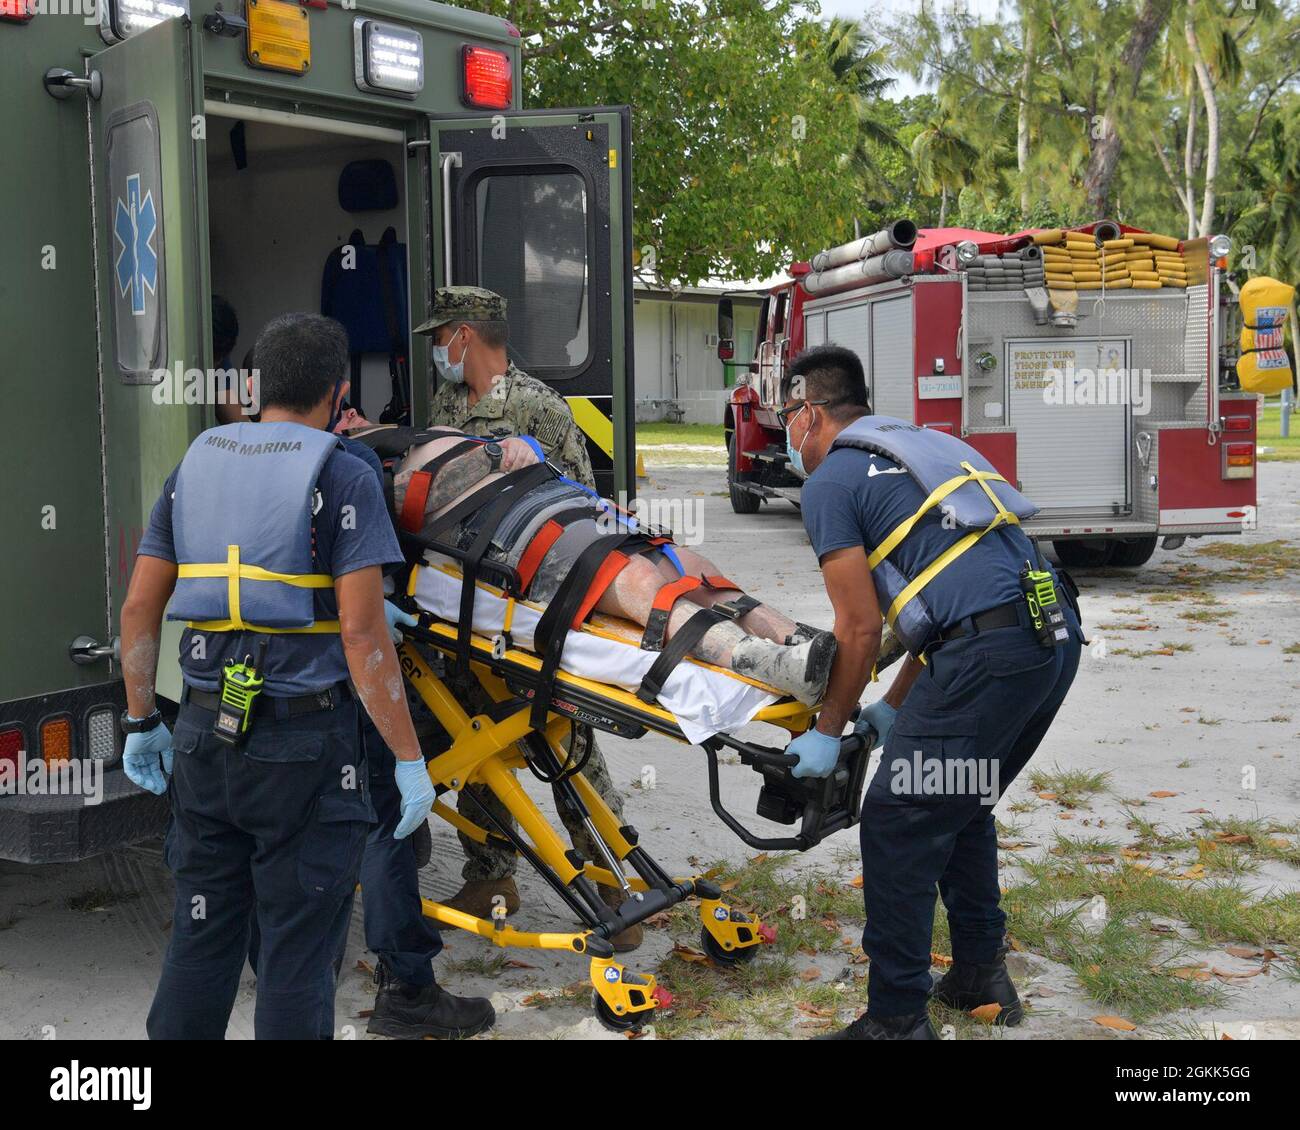 DIEGO GARCIA, British Indian Ocean Territory (May 12, 2021) – U.S. Navy Sailors along with first responders transport a shark attack victim into an ambulance during a drill on Diego Garcia, May 12, 2021. U.S. Navy Support Facility Diego Garcia provides logistic, service, recreational and administrative support to U.S. and allied forces forward deployed to the Indian Ocean and Arabian Gulf. Stock Photo